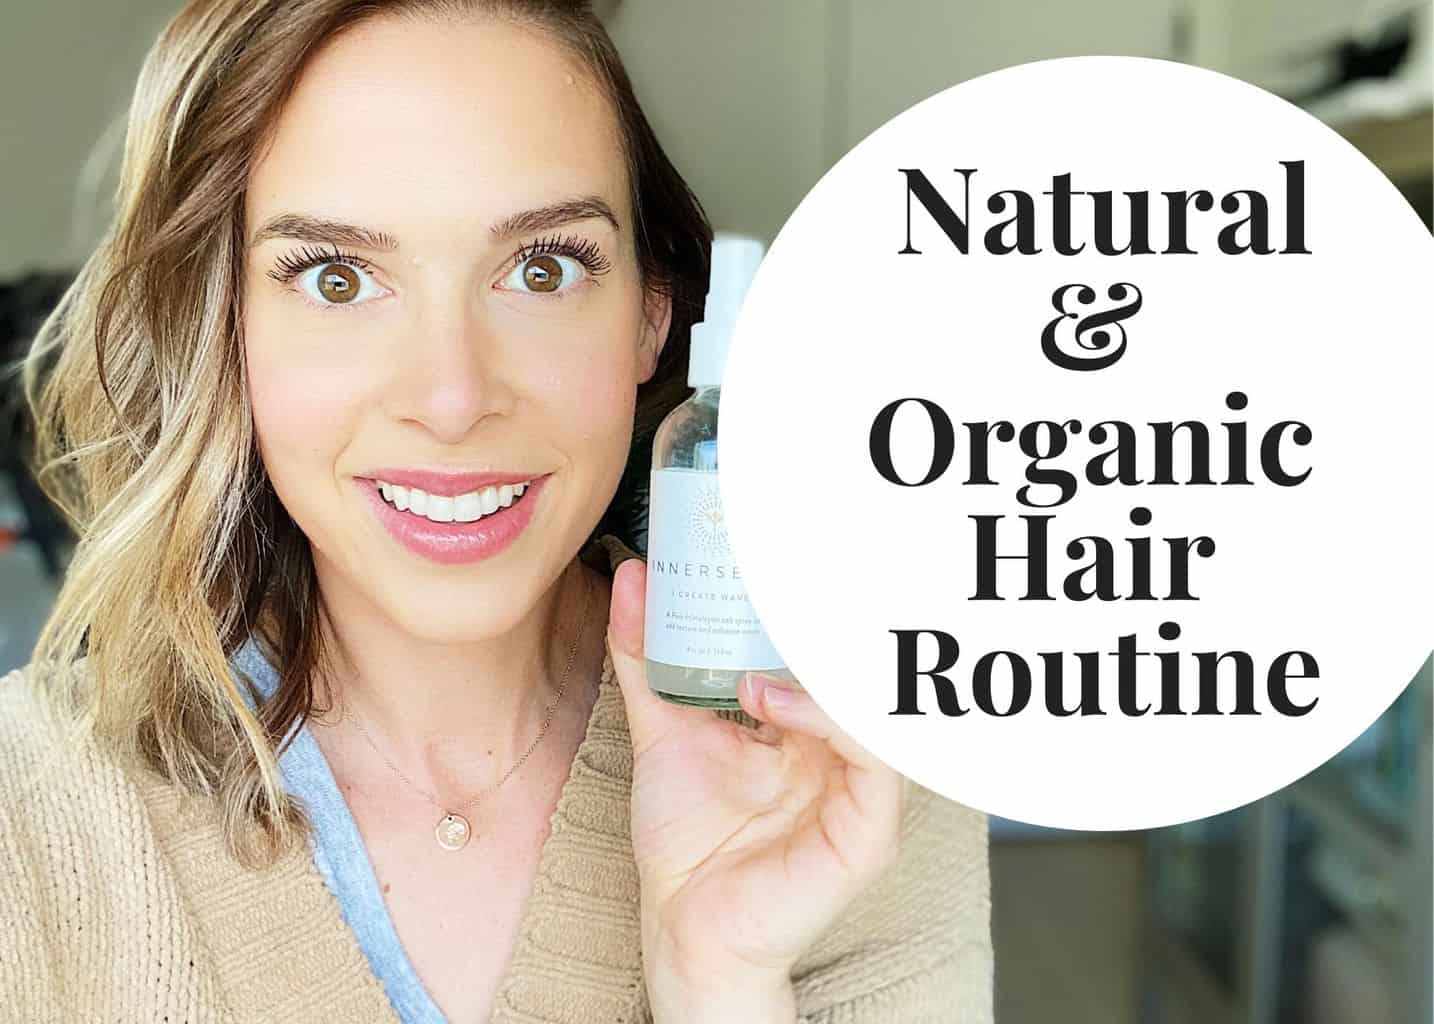 Natural and organic hair routine